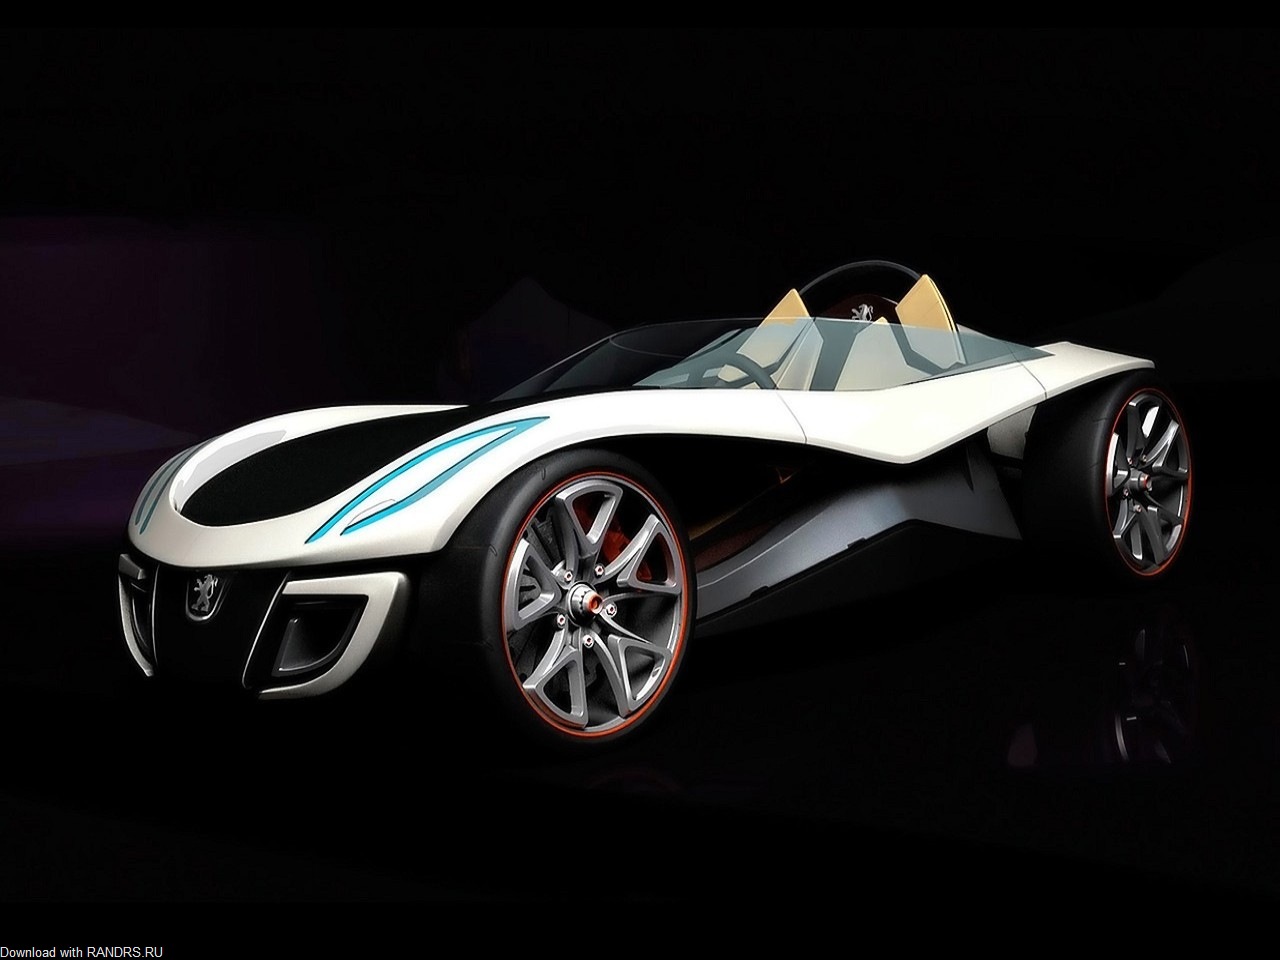 Pictures 3D Car New Wallpapers wallpapers pictures free download